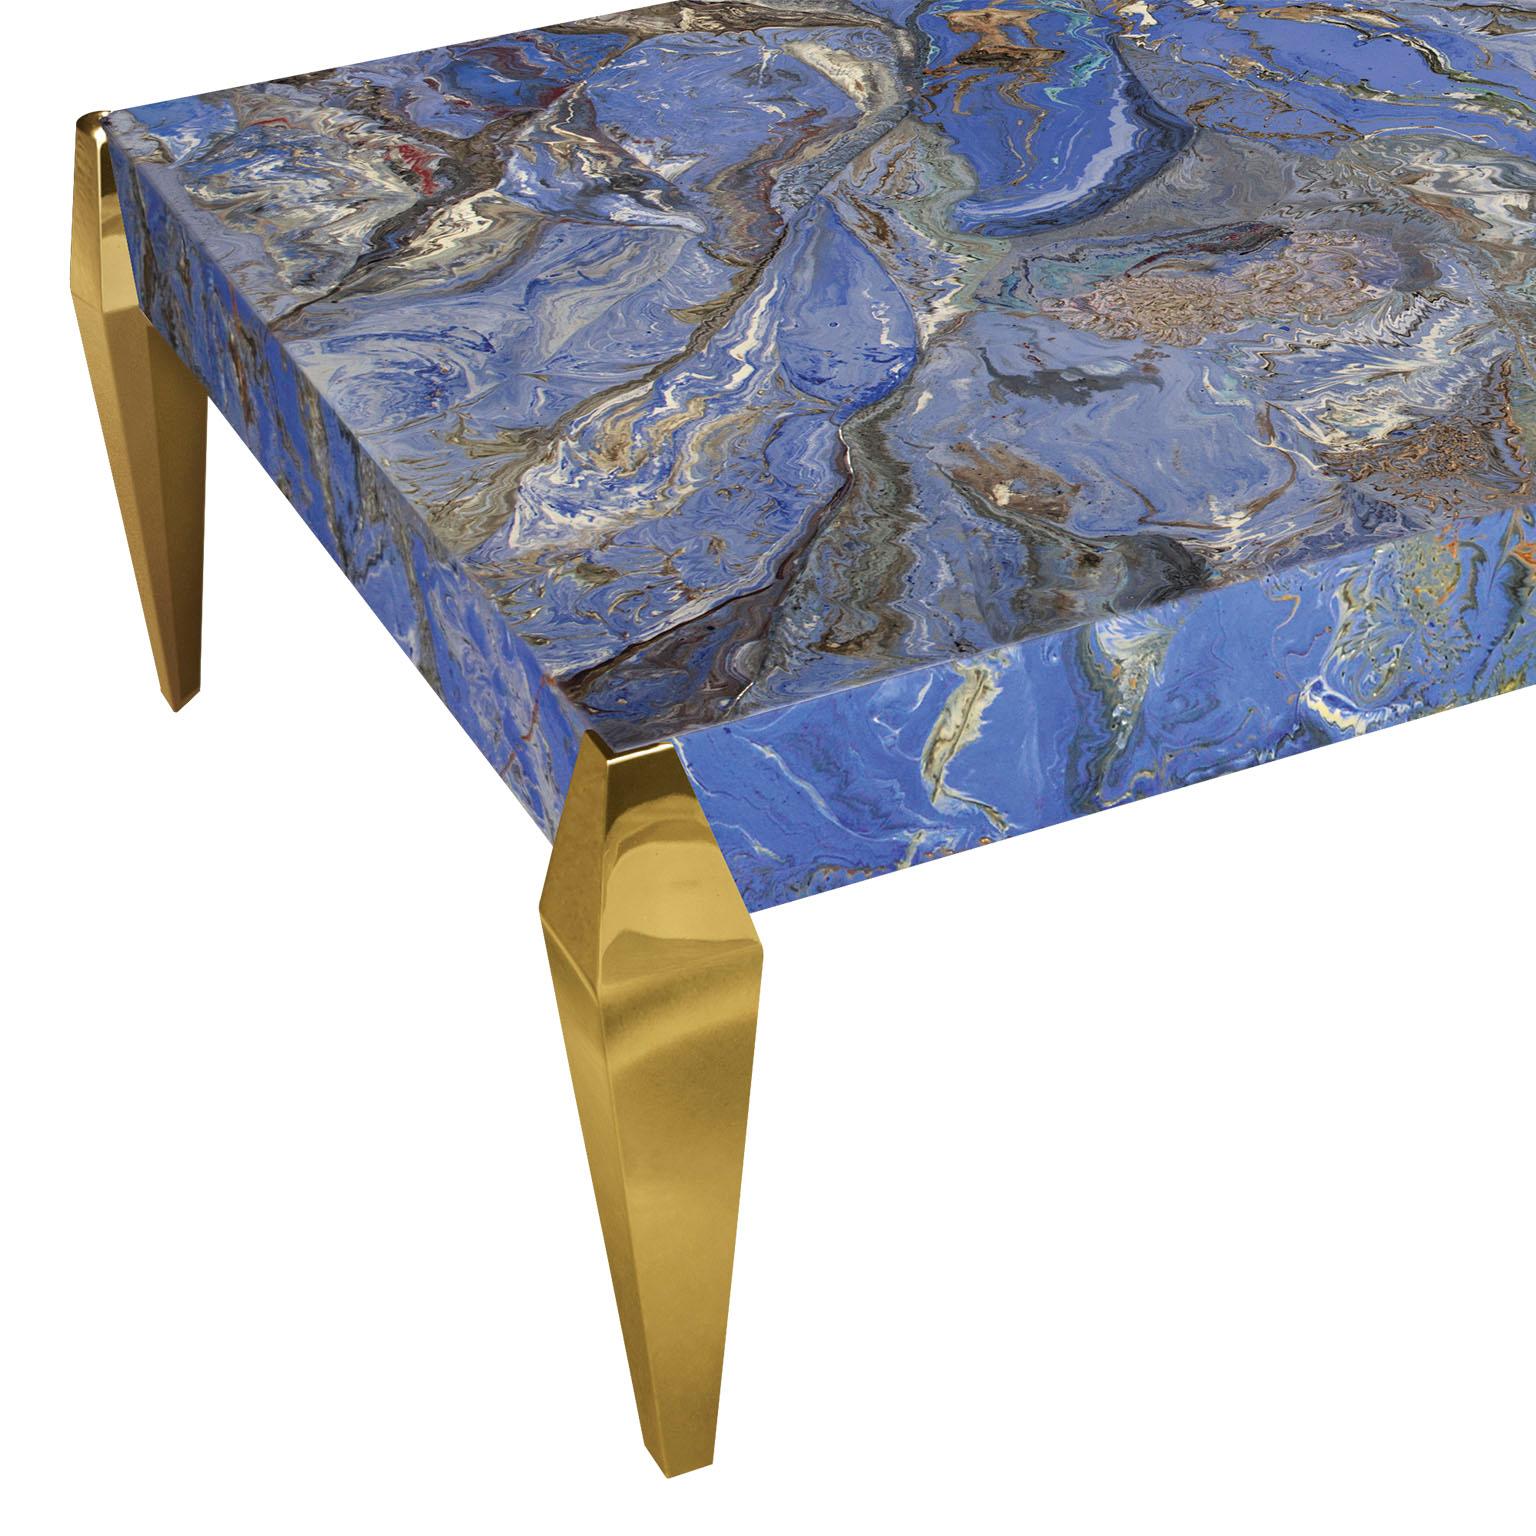 In Cobalto H coffee table our purpose is to show the new concept of the scagliola giving emphasize to explosion of colors and the texture of the “material”.
Our artist creativity is highlighted using different stylish metals that give character to